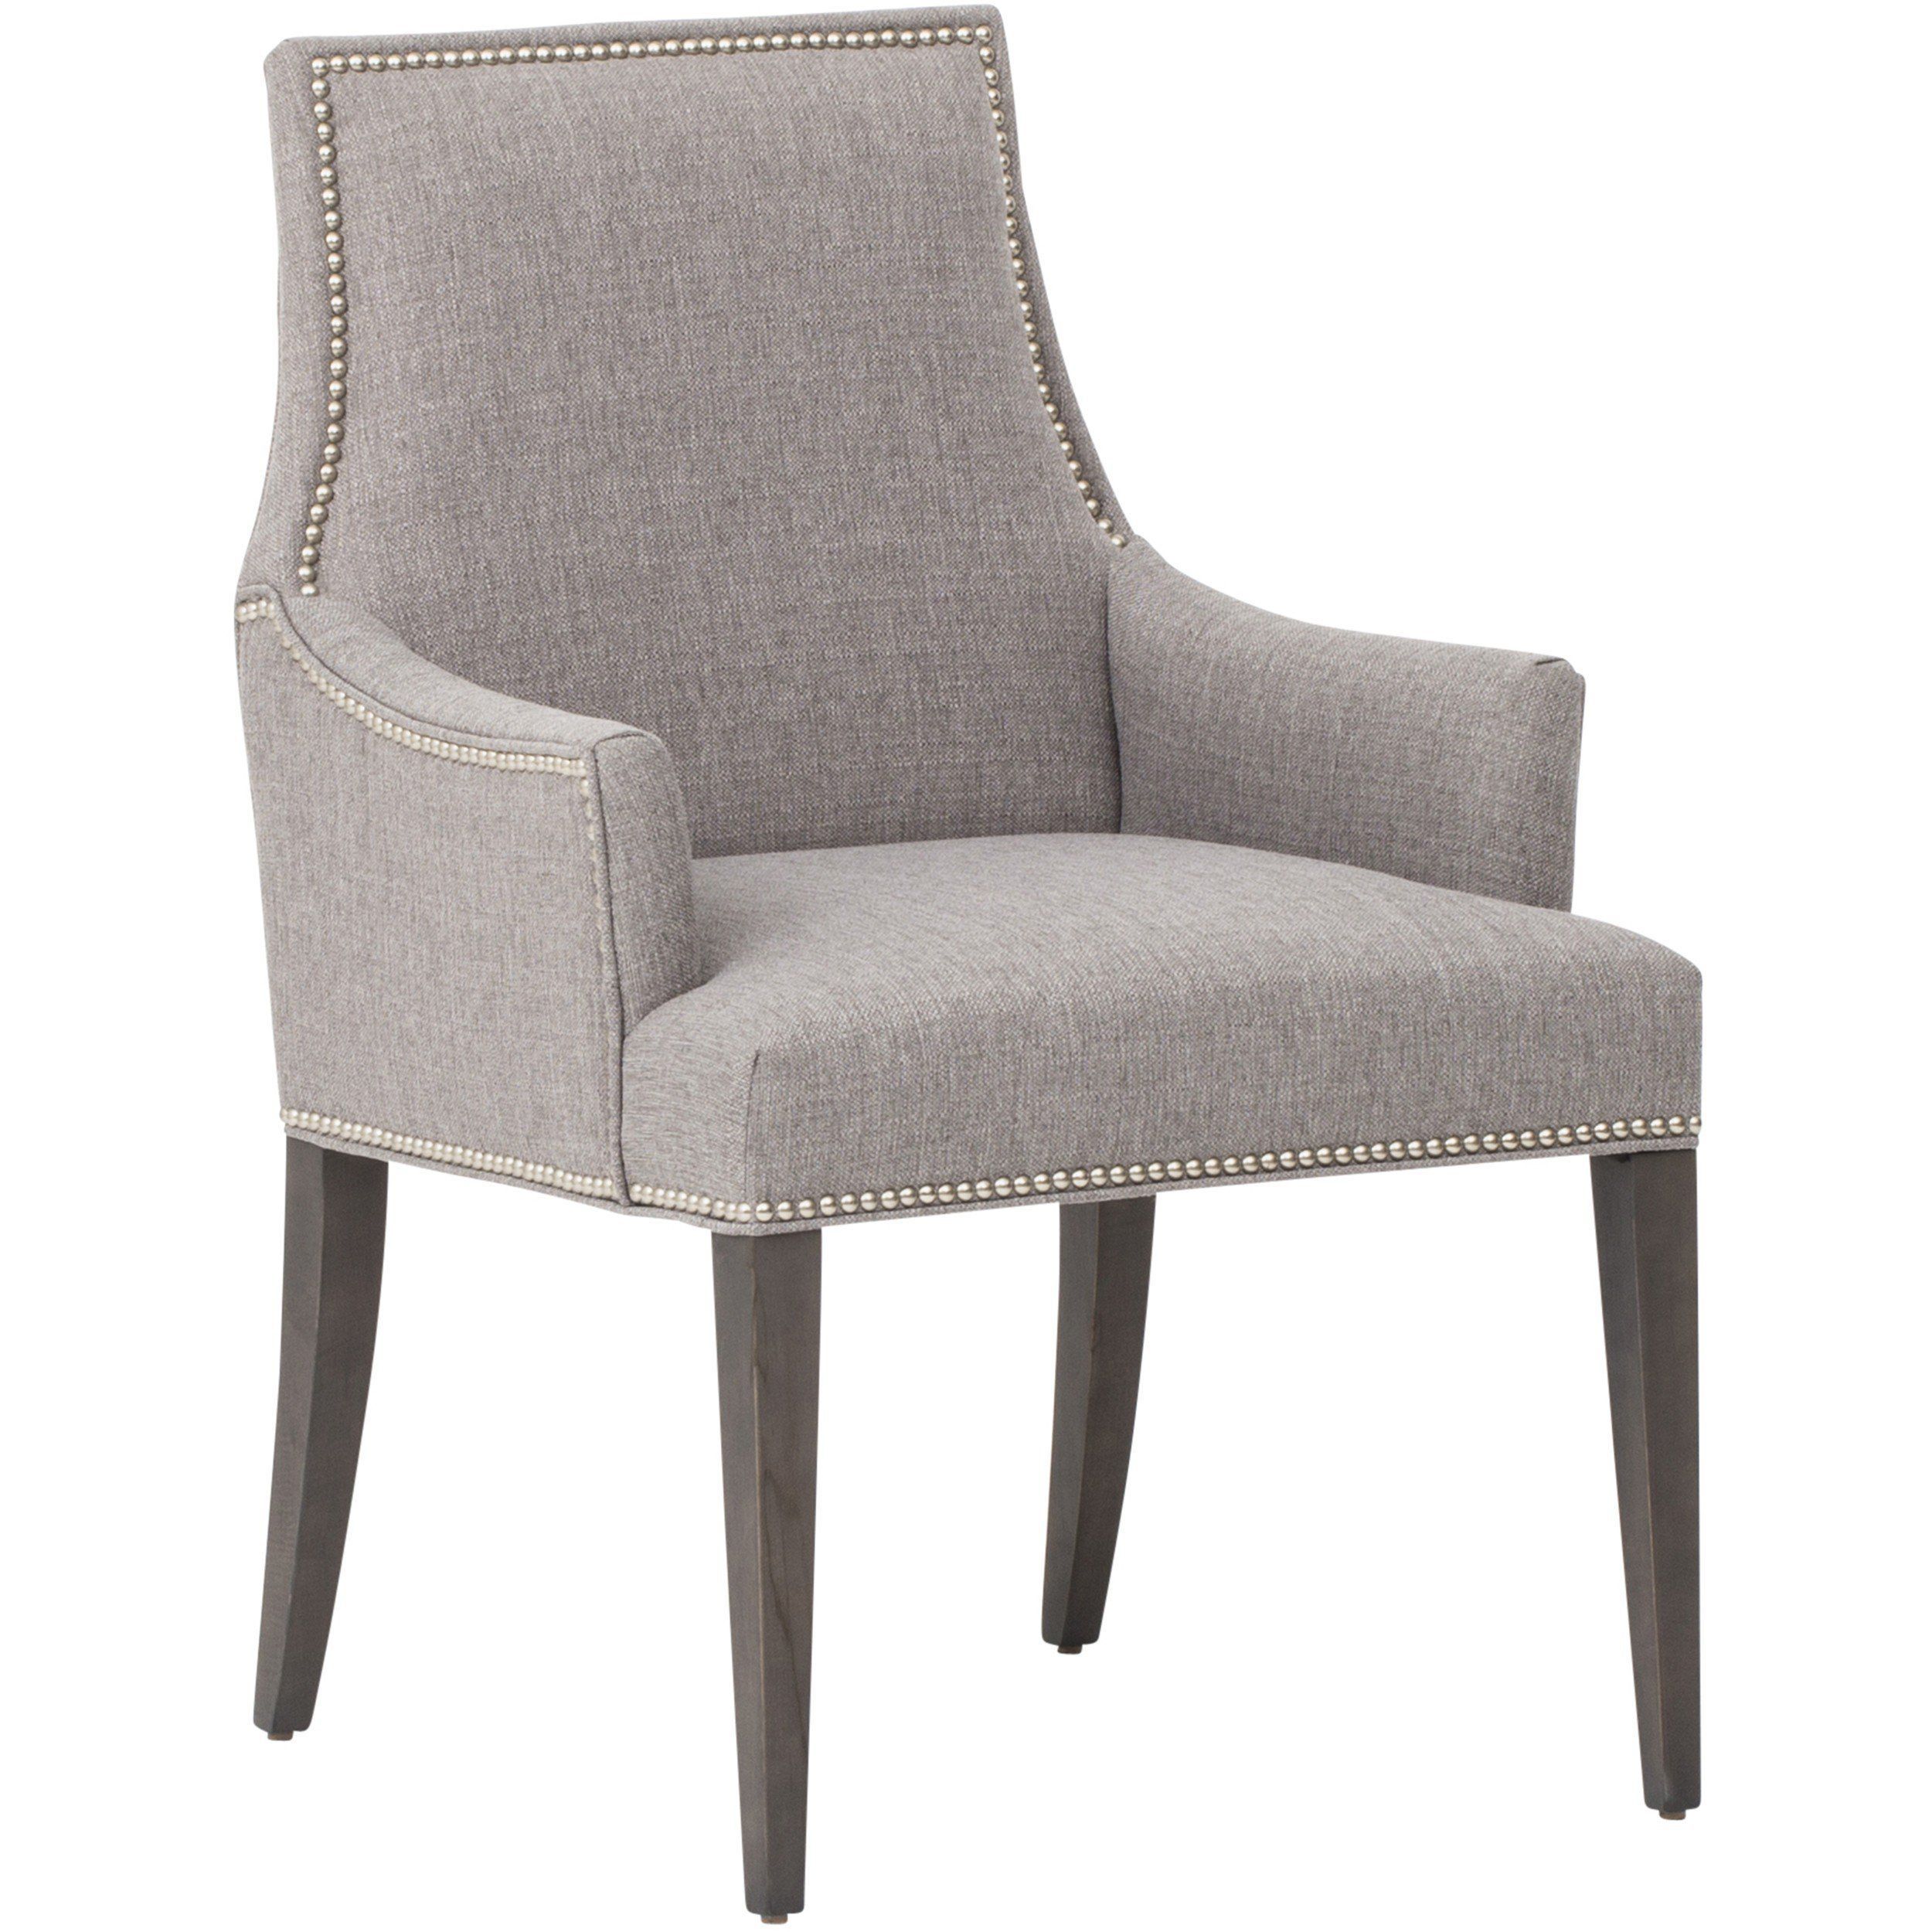 Oliver Arm Chair, Durango Slate In 2018 | Fabulous Furniture Regarding Tate Arm Sofa Chairs (View 25 of 25)